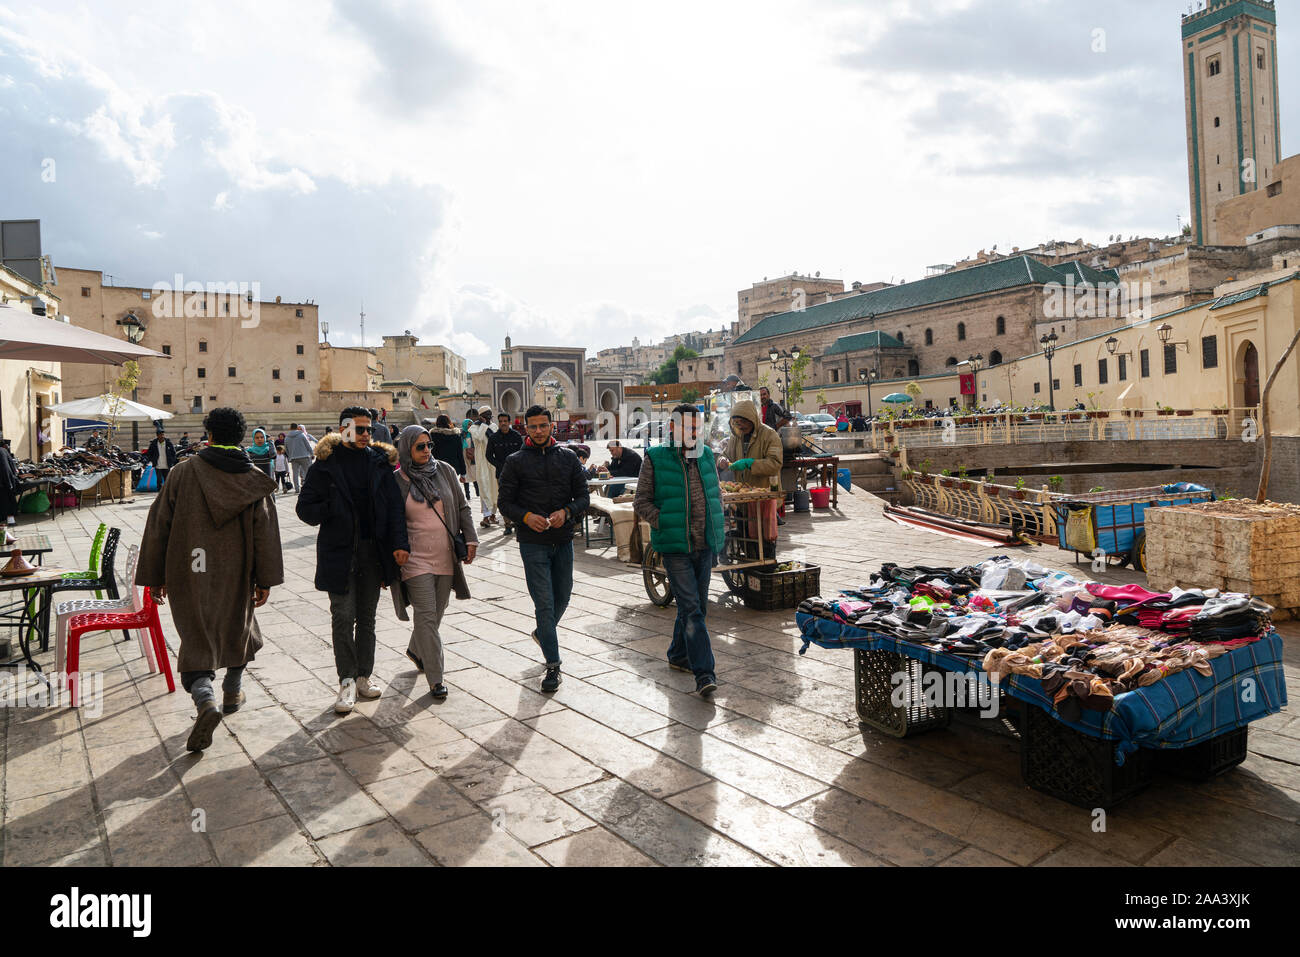 Fez, Morocco. November 9, 2019.   people walking on the Place R'cif on an autumn day Stock Photo